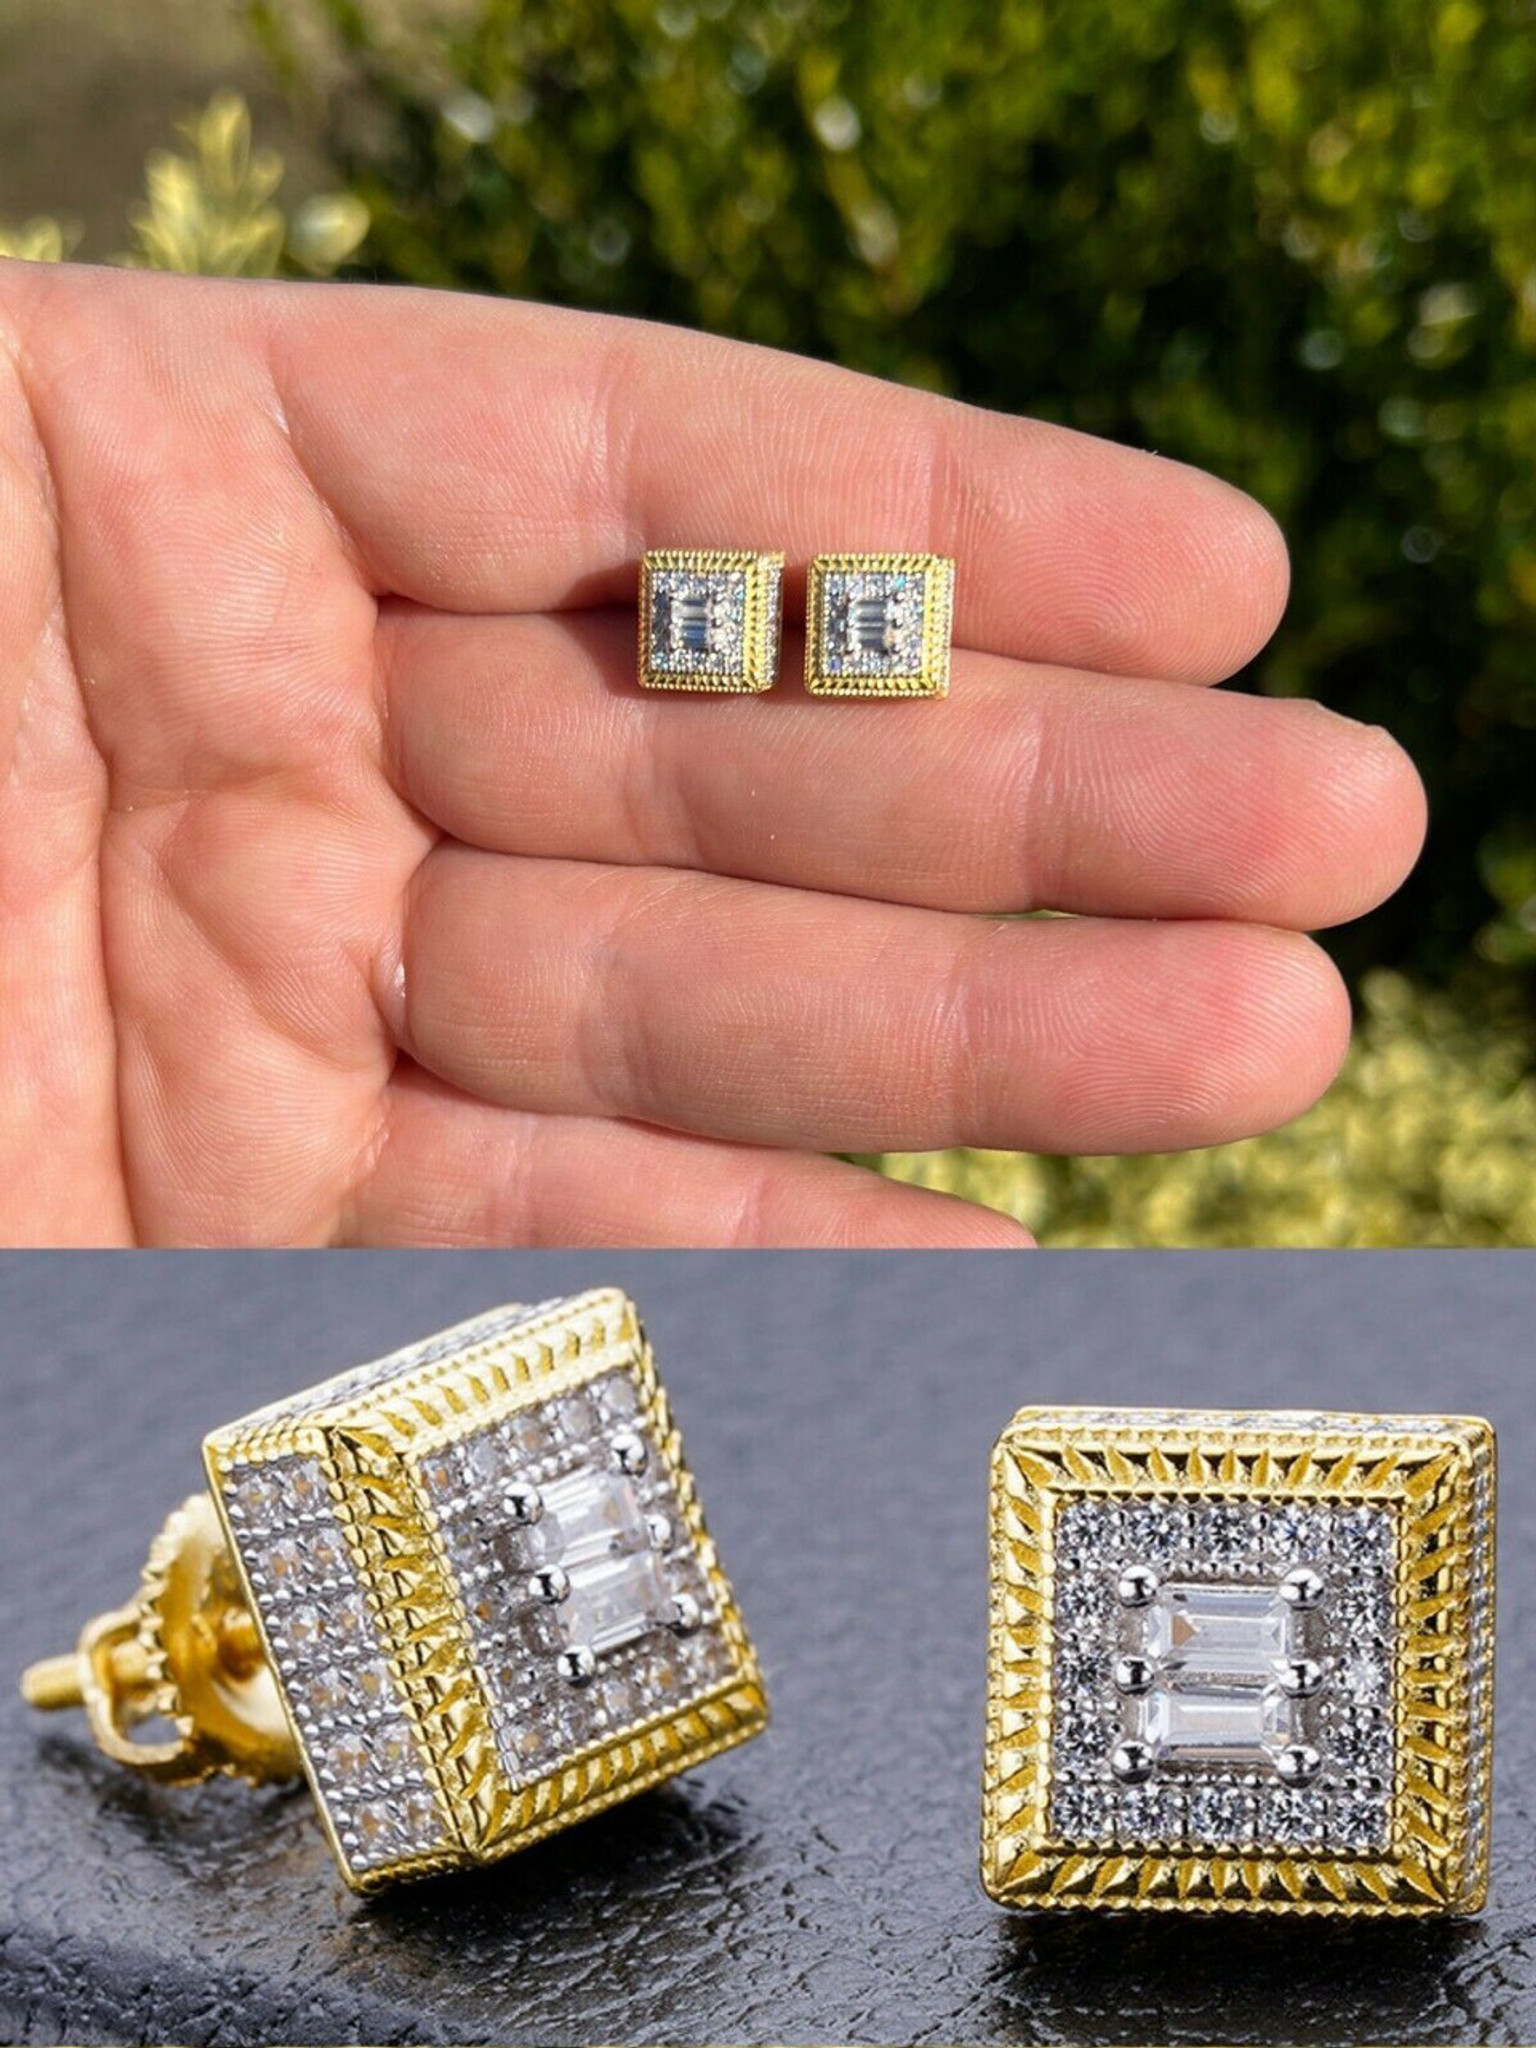 Geometric Crystal Stud Earrings Large Square Hoop In Style For Weddings And  Parties Fashion Jewelry Gift For Women Item #231116 From Mala84, $8.78 |  DHgate.Com